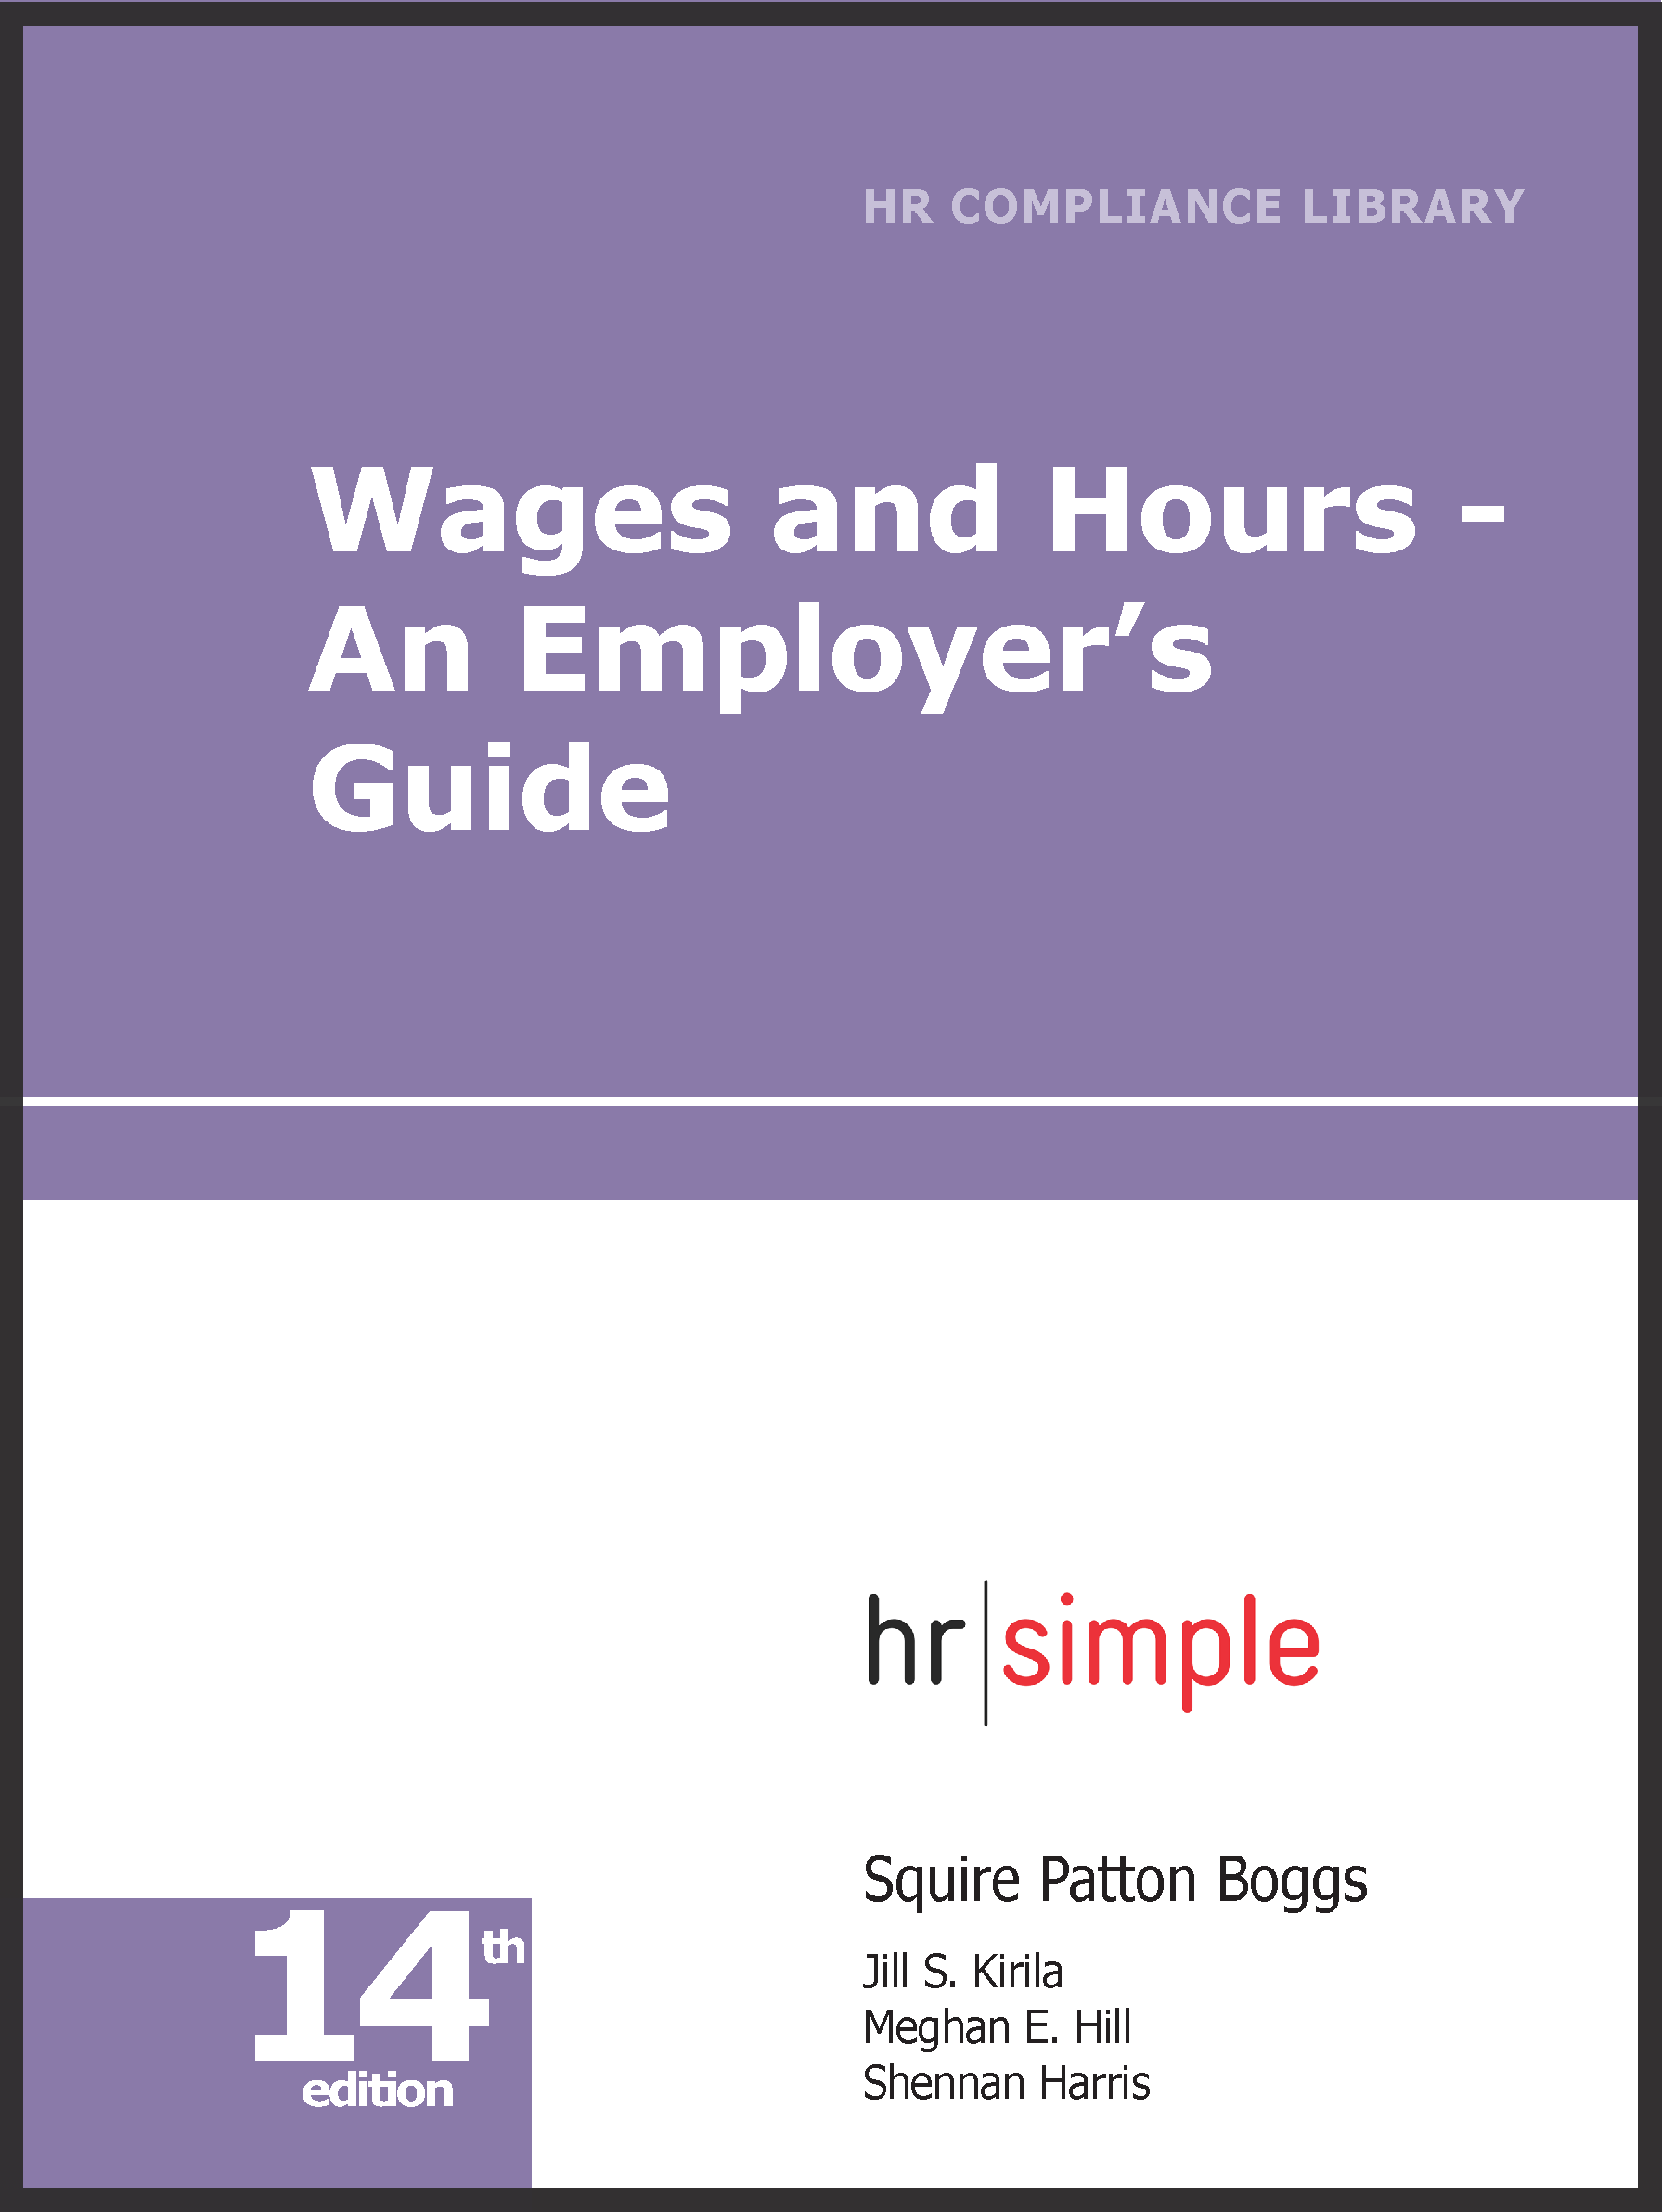 Wages and Hours – An Employer's Guide—Online Only employment law image, remote work, labor laws, employment laws, right to work, order of protection, minimum wage